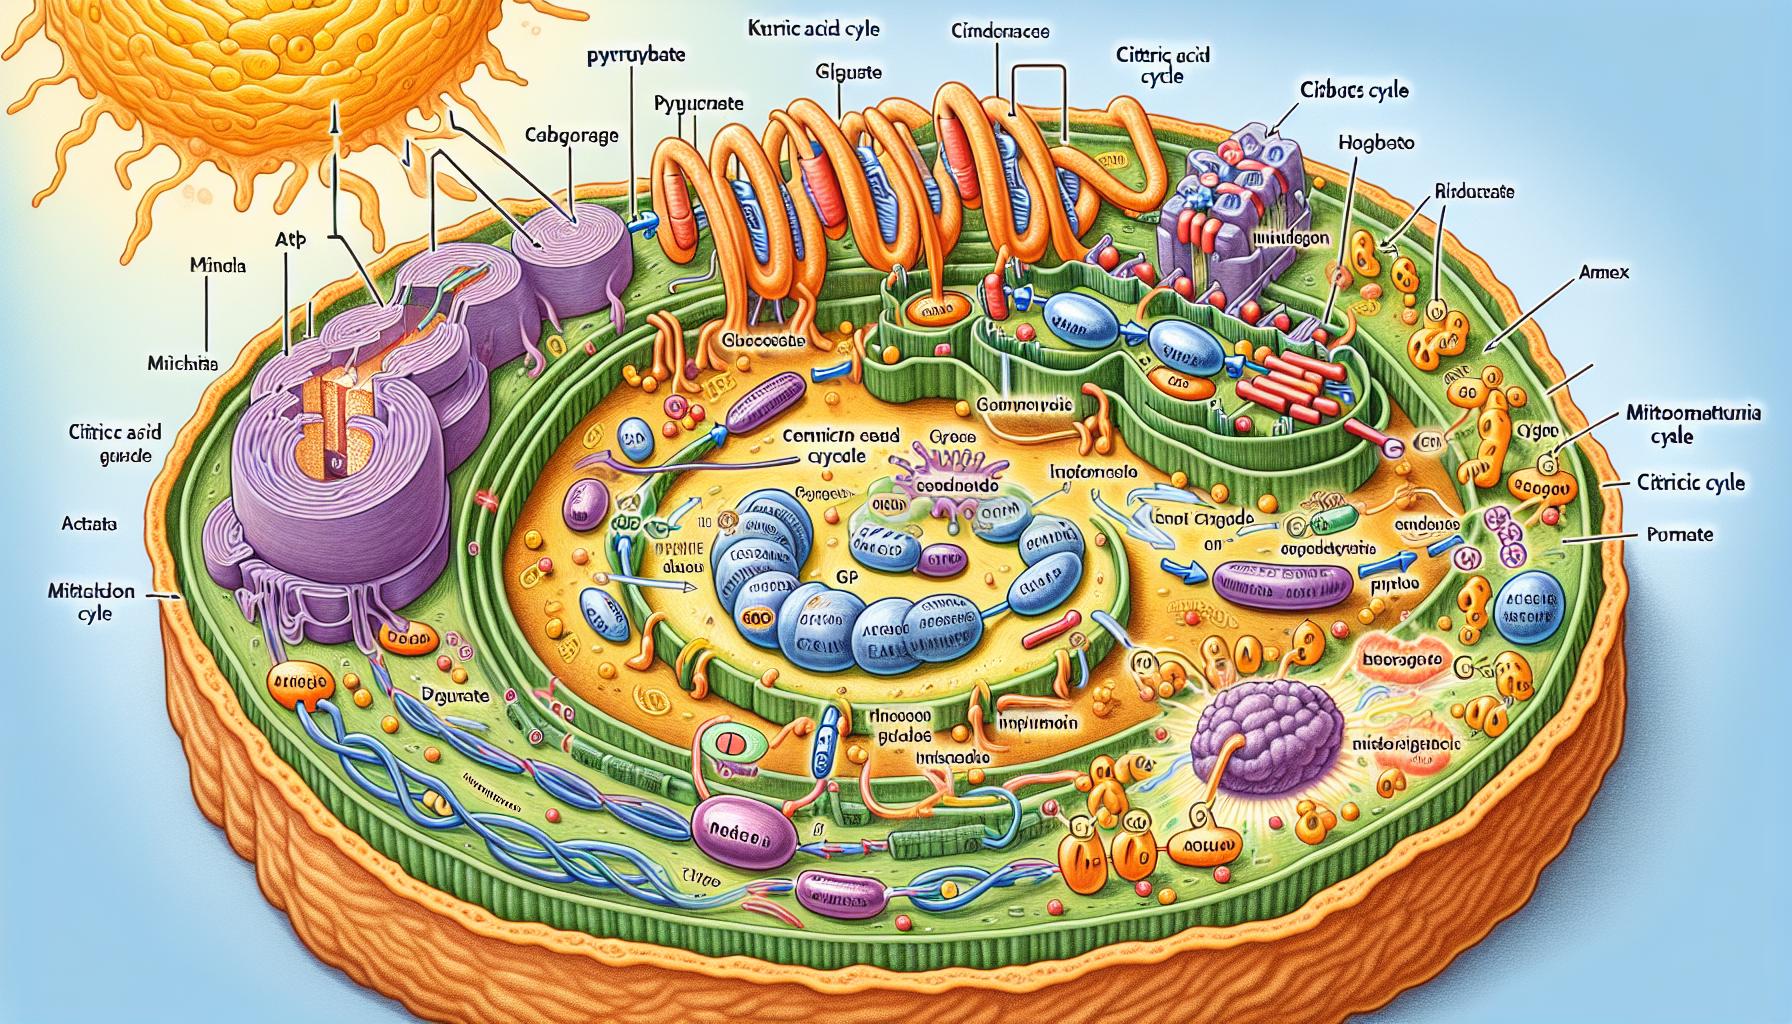 The Role of Glycolysis, Mitochondria and the Krebs Cycle in Energy Production